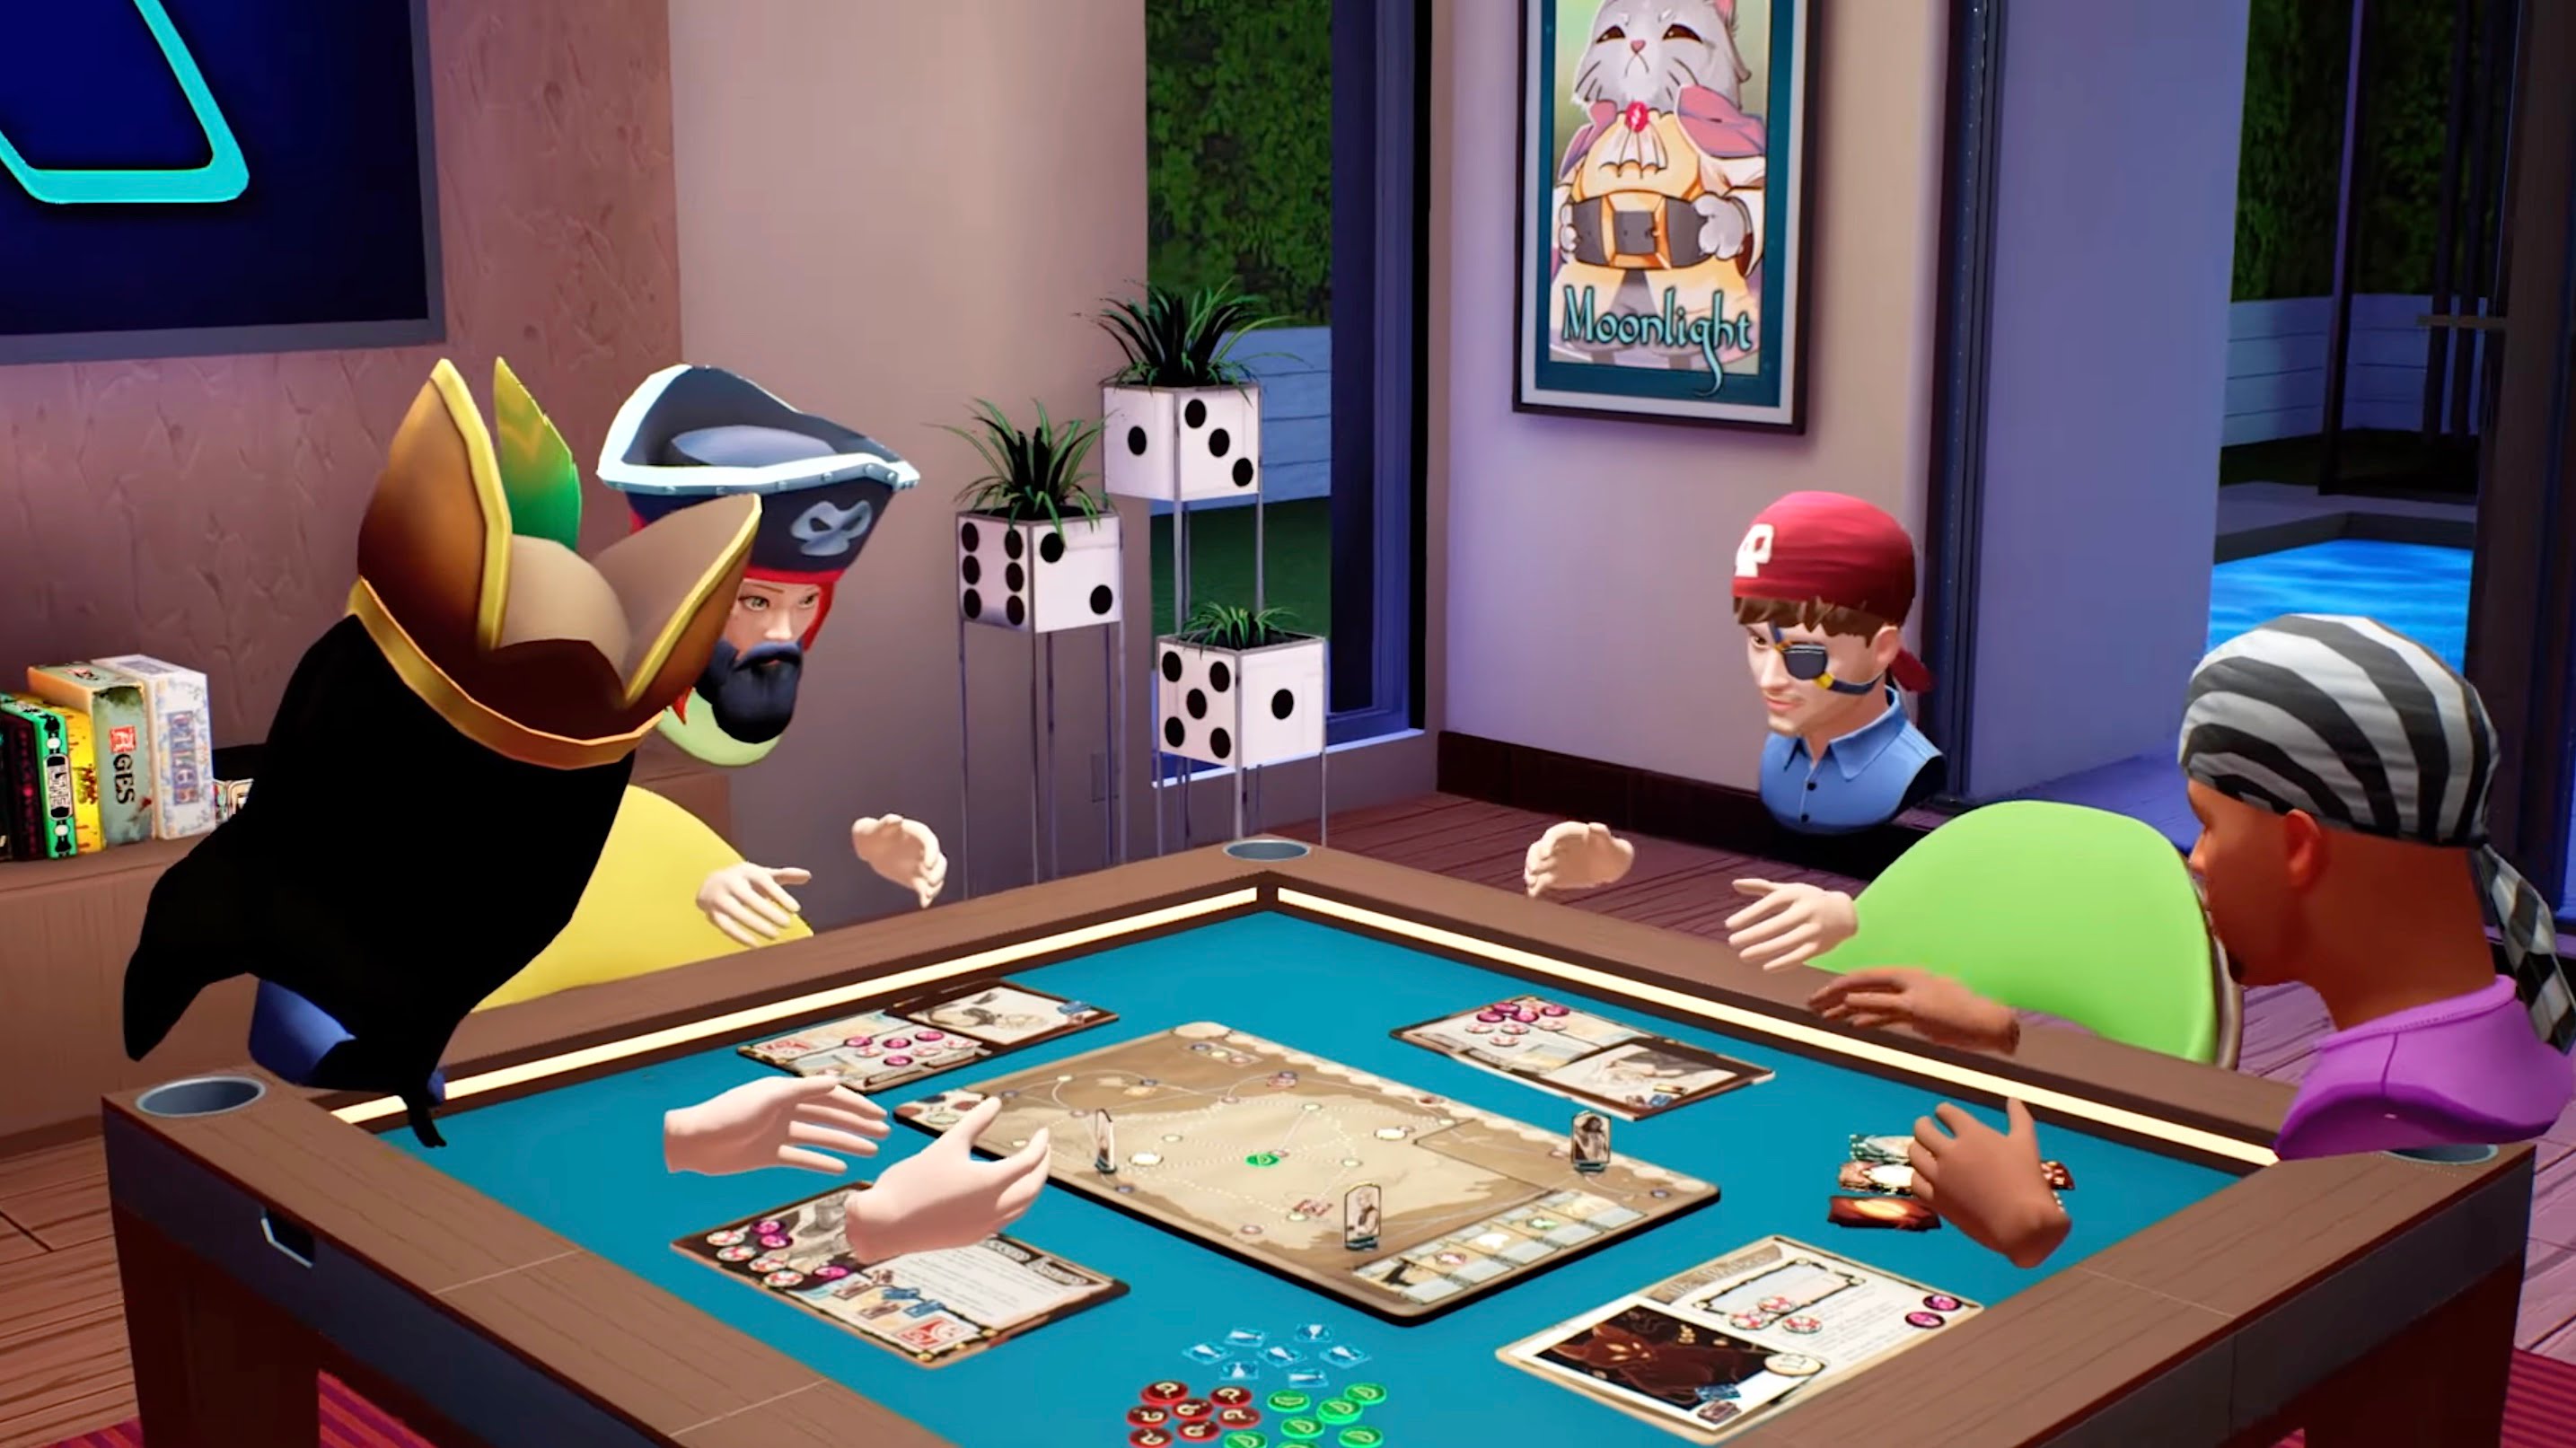 “All on Board” brings board game nights to virtual reality